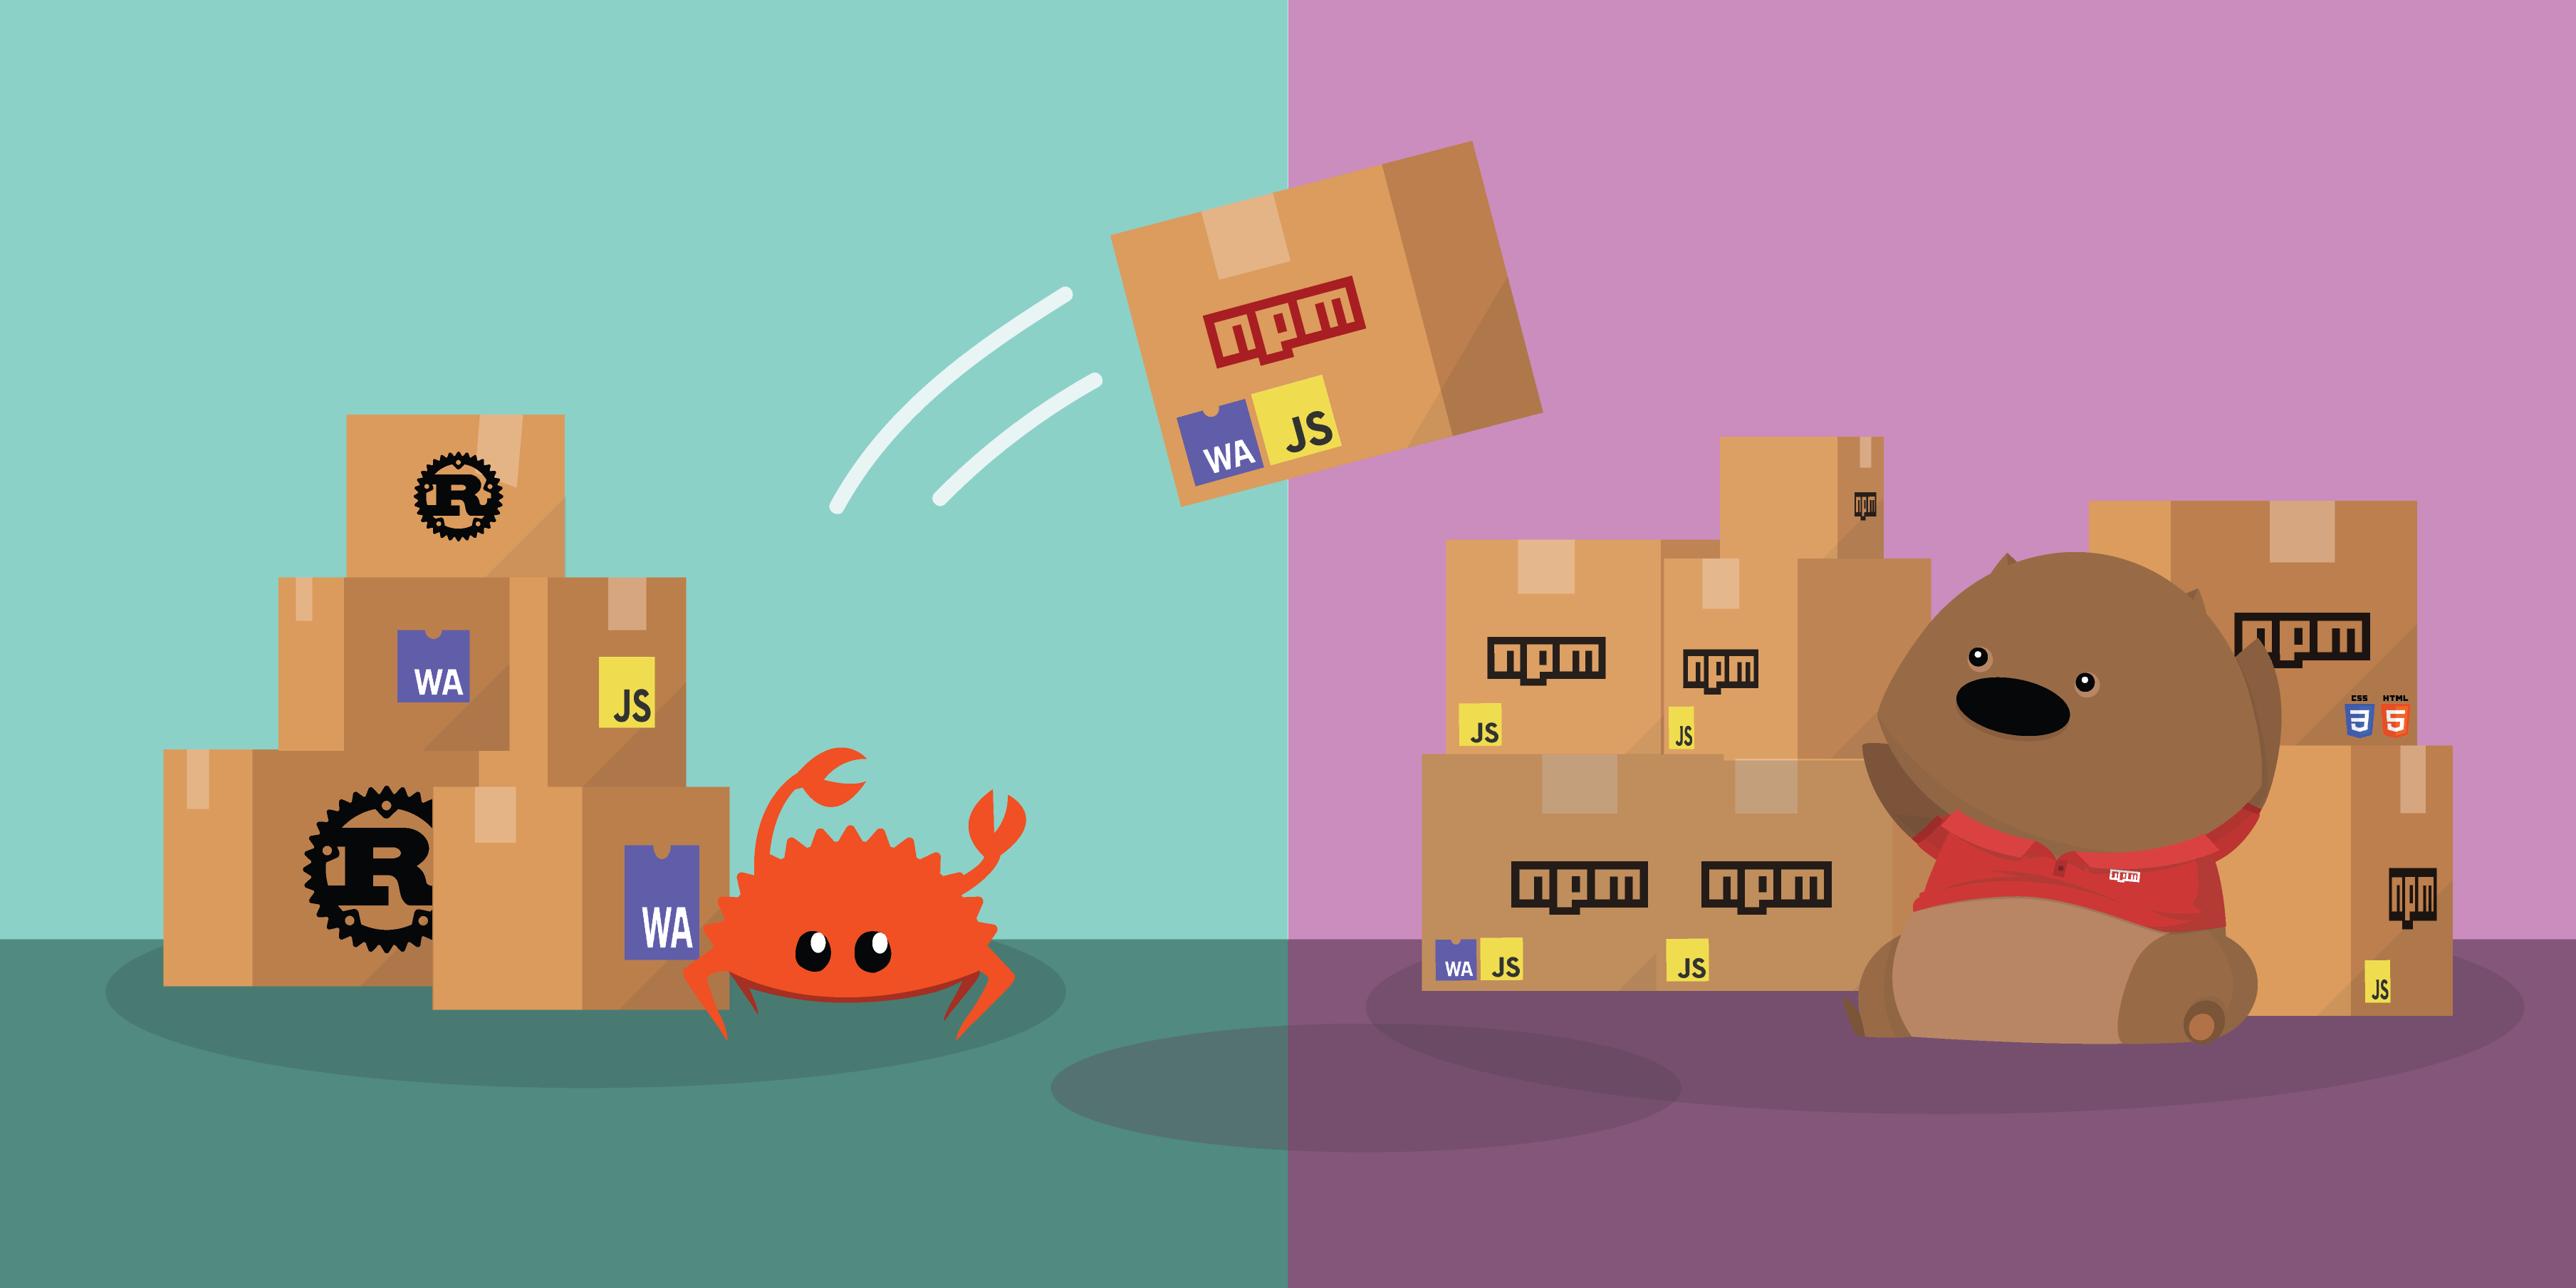 2 panels, one showing ferris the crab with assorted rust and wasm packages and one with the npm wombat with assorted js wasm and css/html packages. the crab is throwing a package over towards the wombat